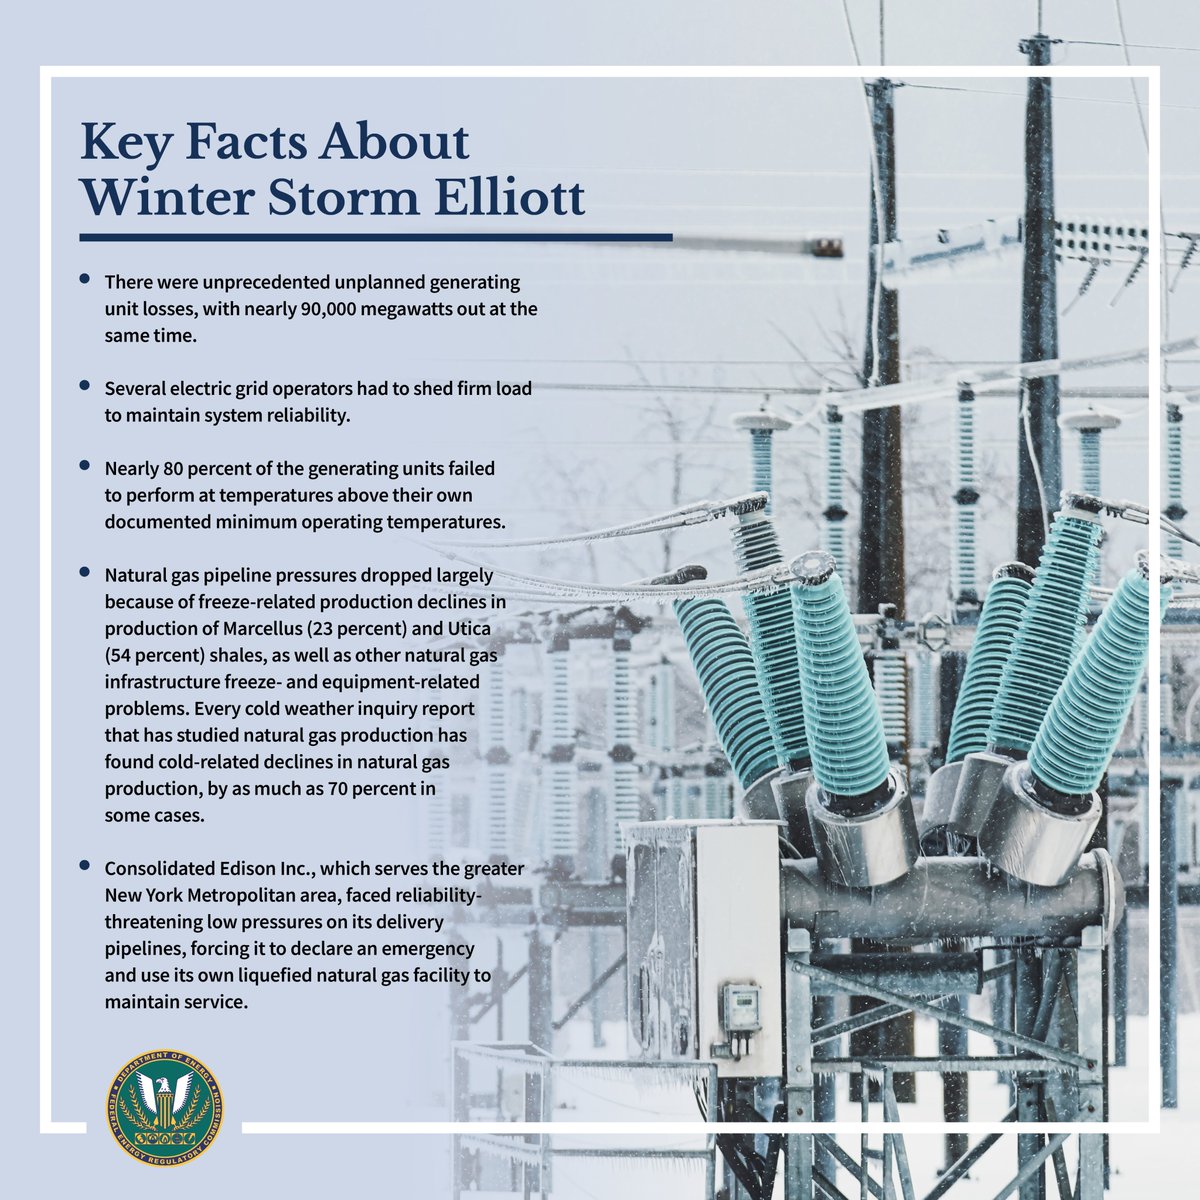 @FERC and @NERC_Official staff today presented their report on Winter Storm Elliott, recommending completion of cold weather reliability standards and improvements to reliability for U.S. natural gas infrastructure.